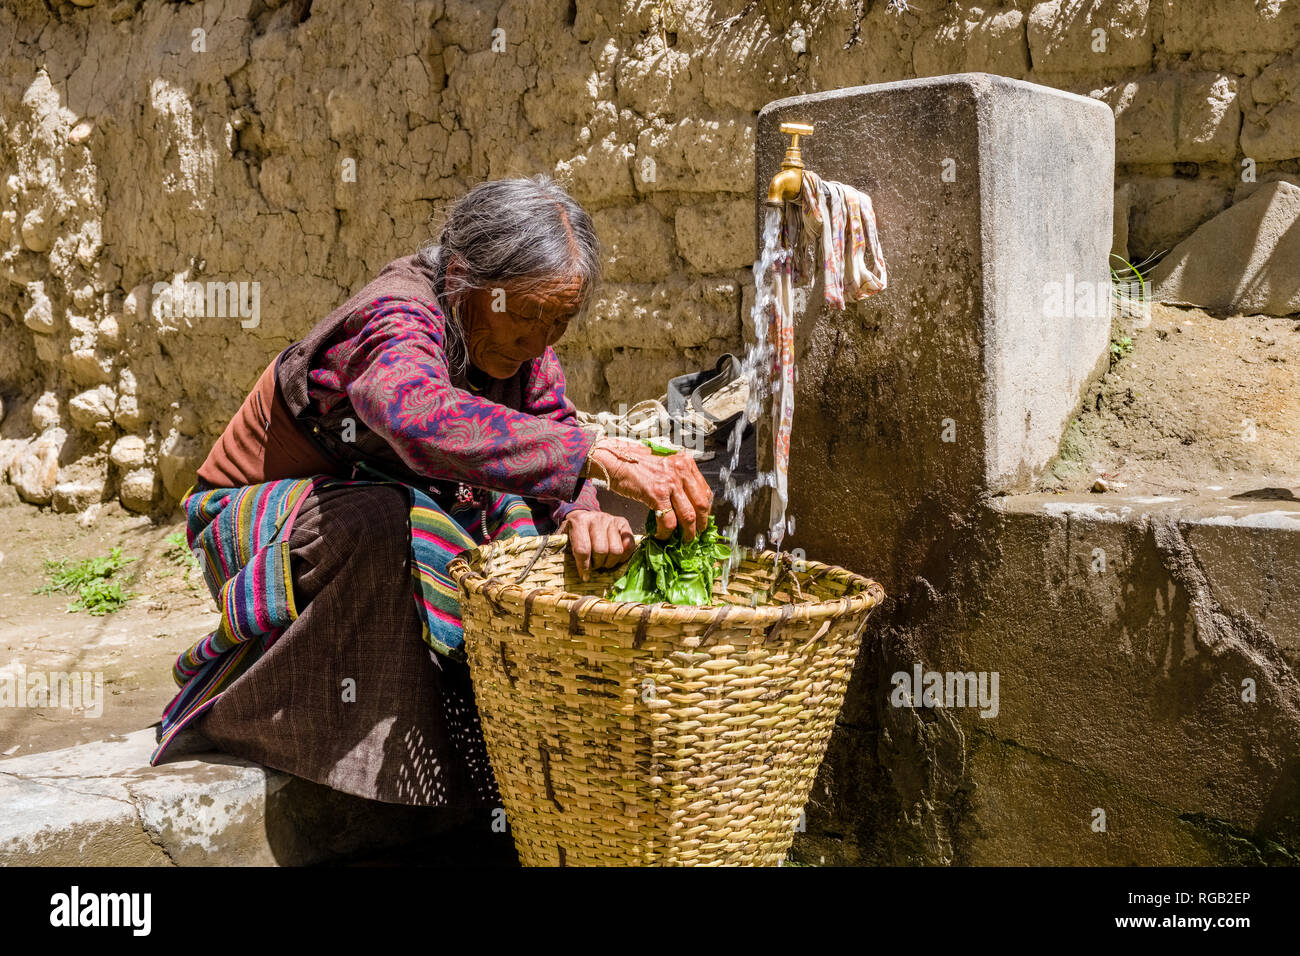 A local woman is cleaning vegetables in a basket at a water tab inside the walled town Stock Photo